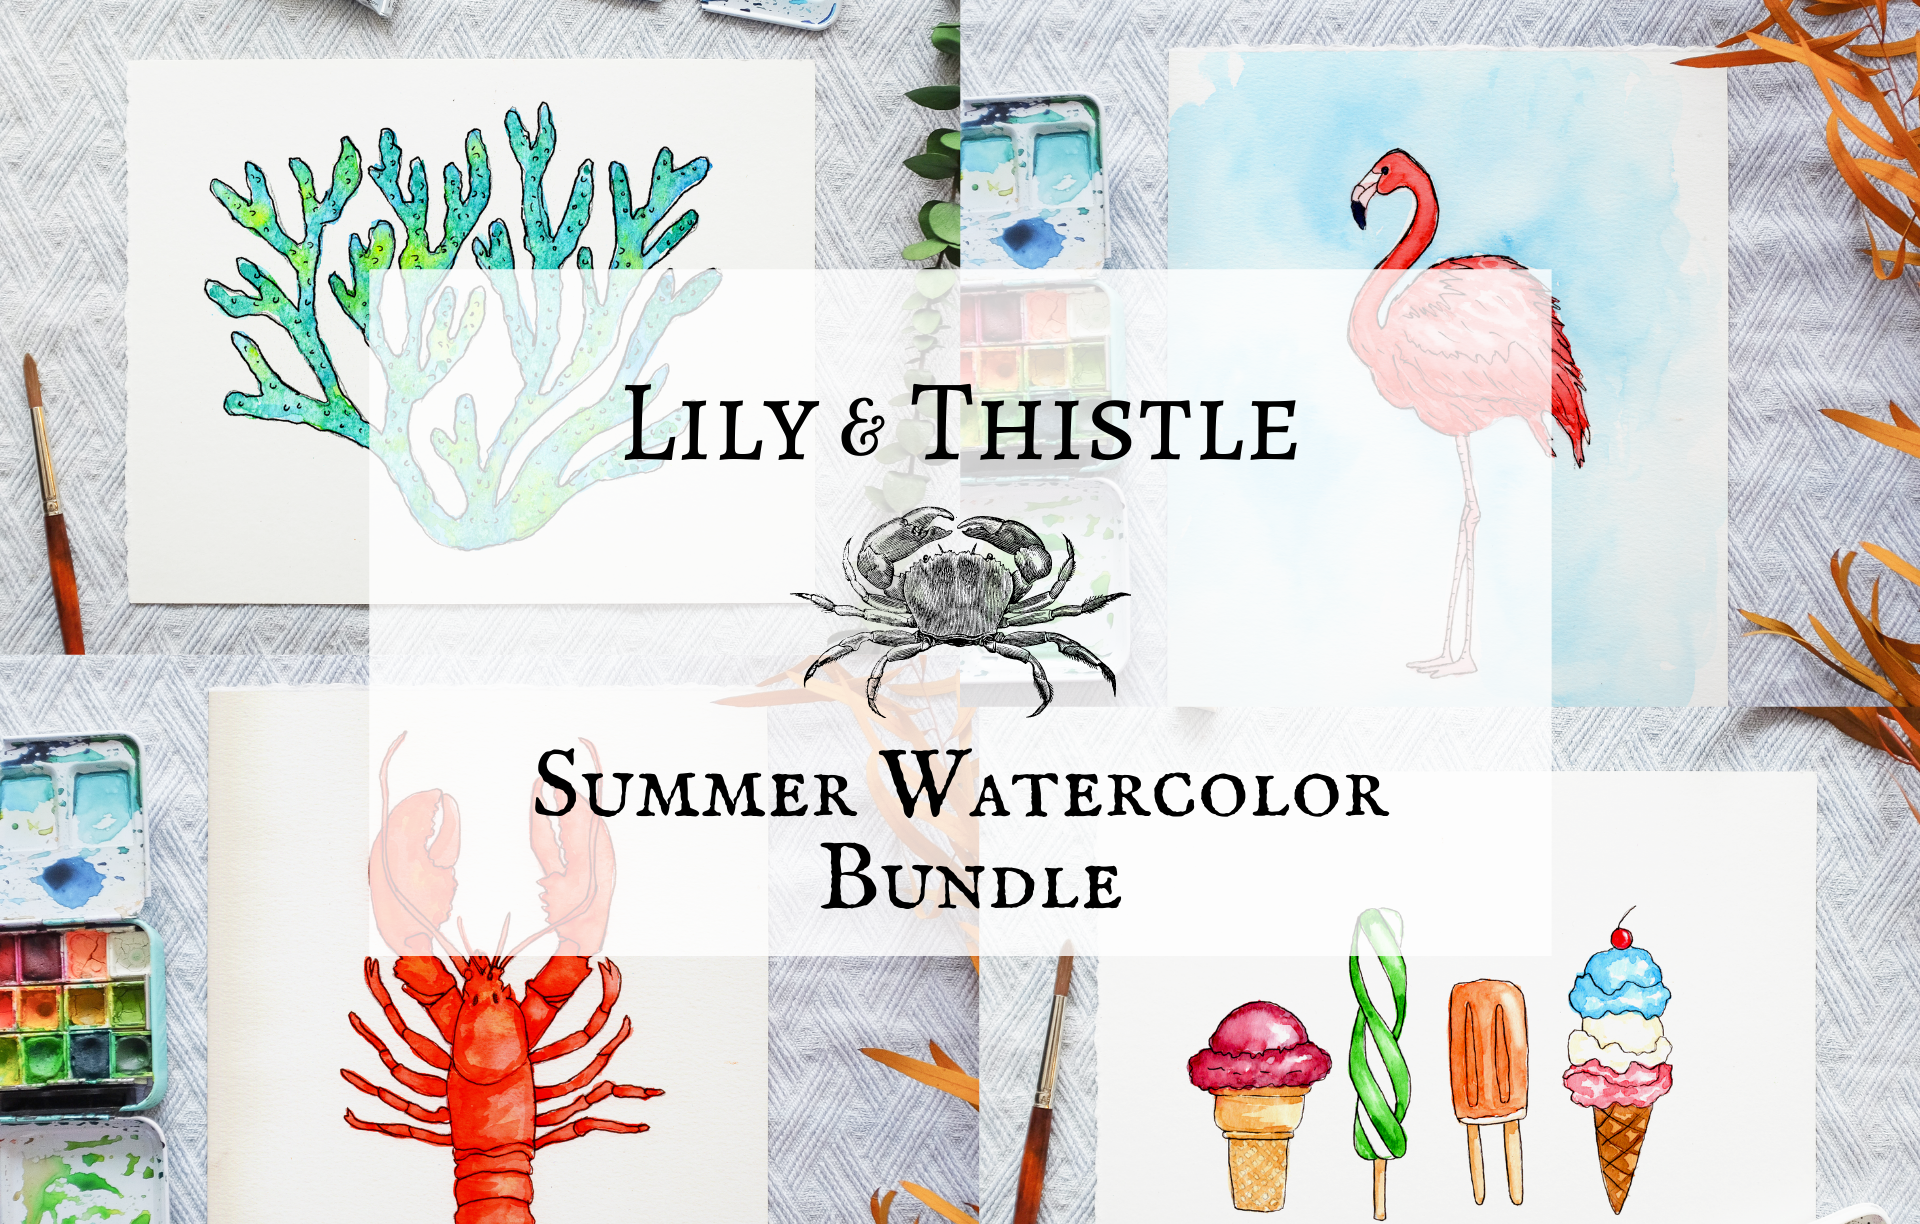 Prime Day Deals Art Supplies for Creative Moms and Kids - Lily & Thistle